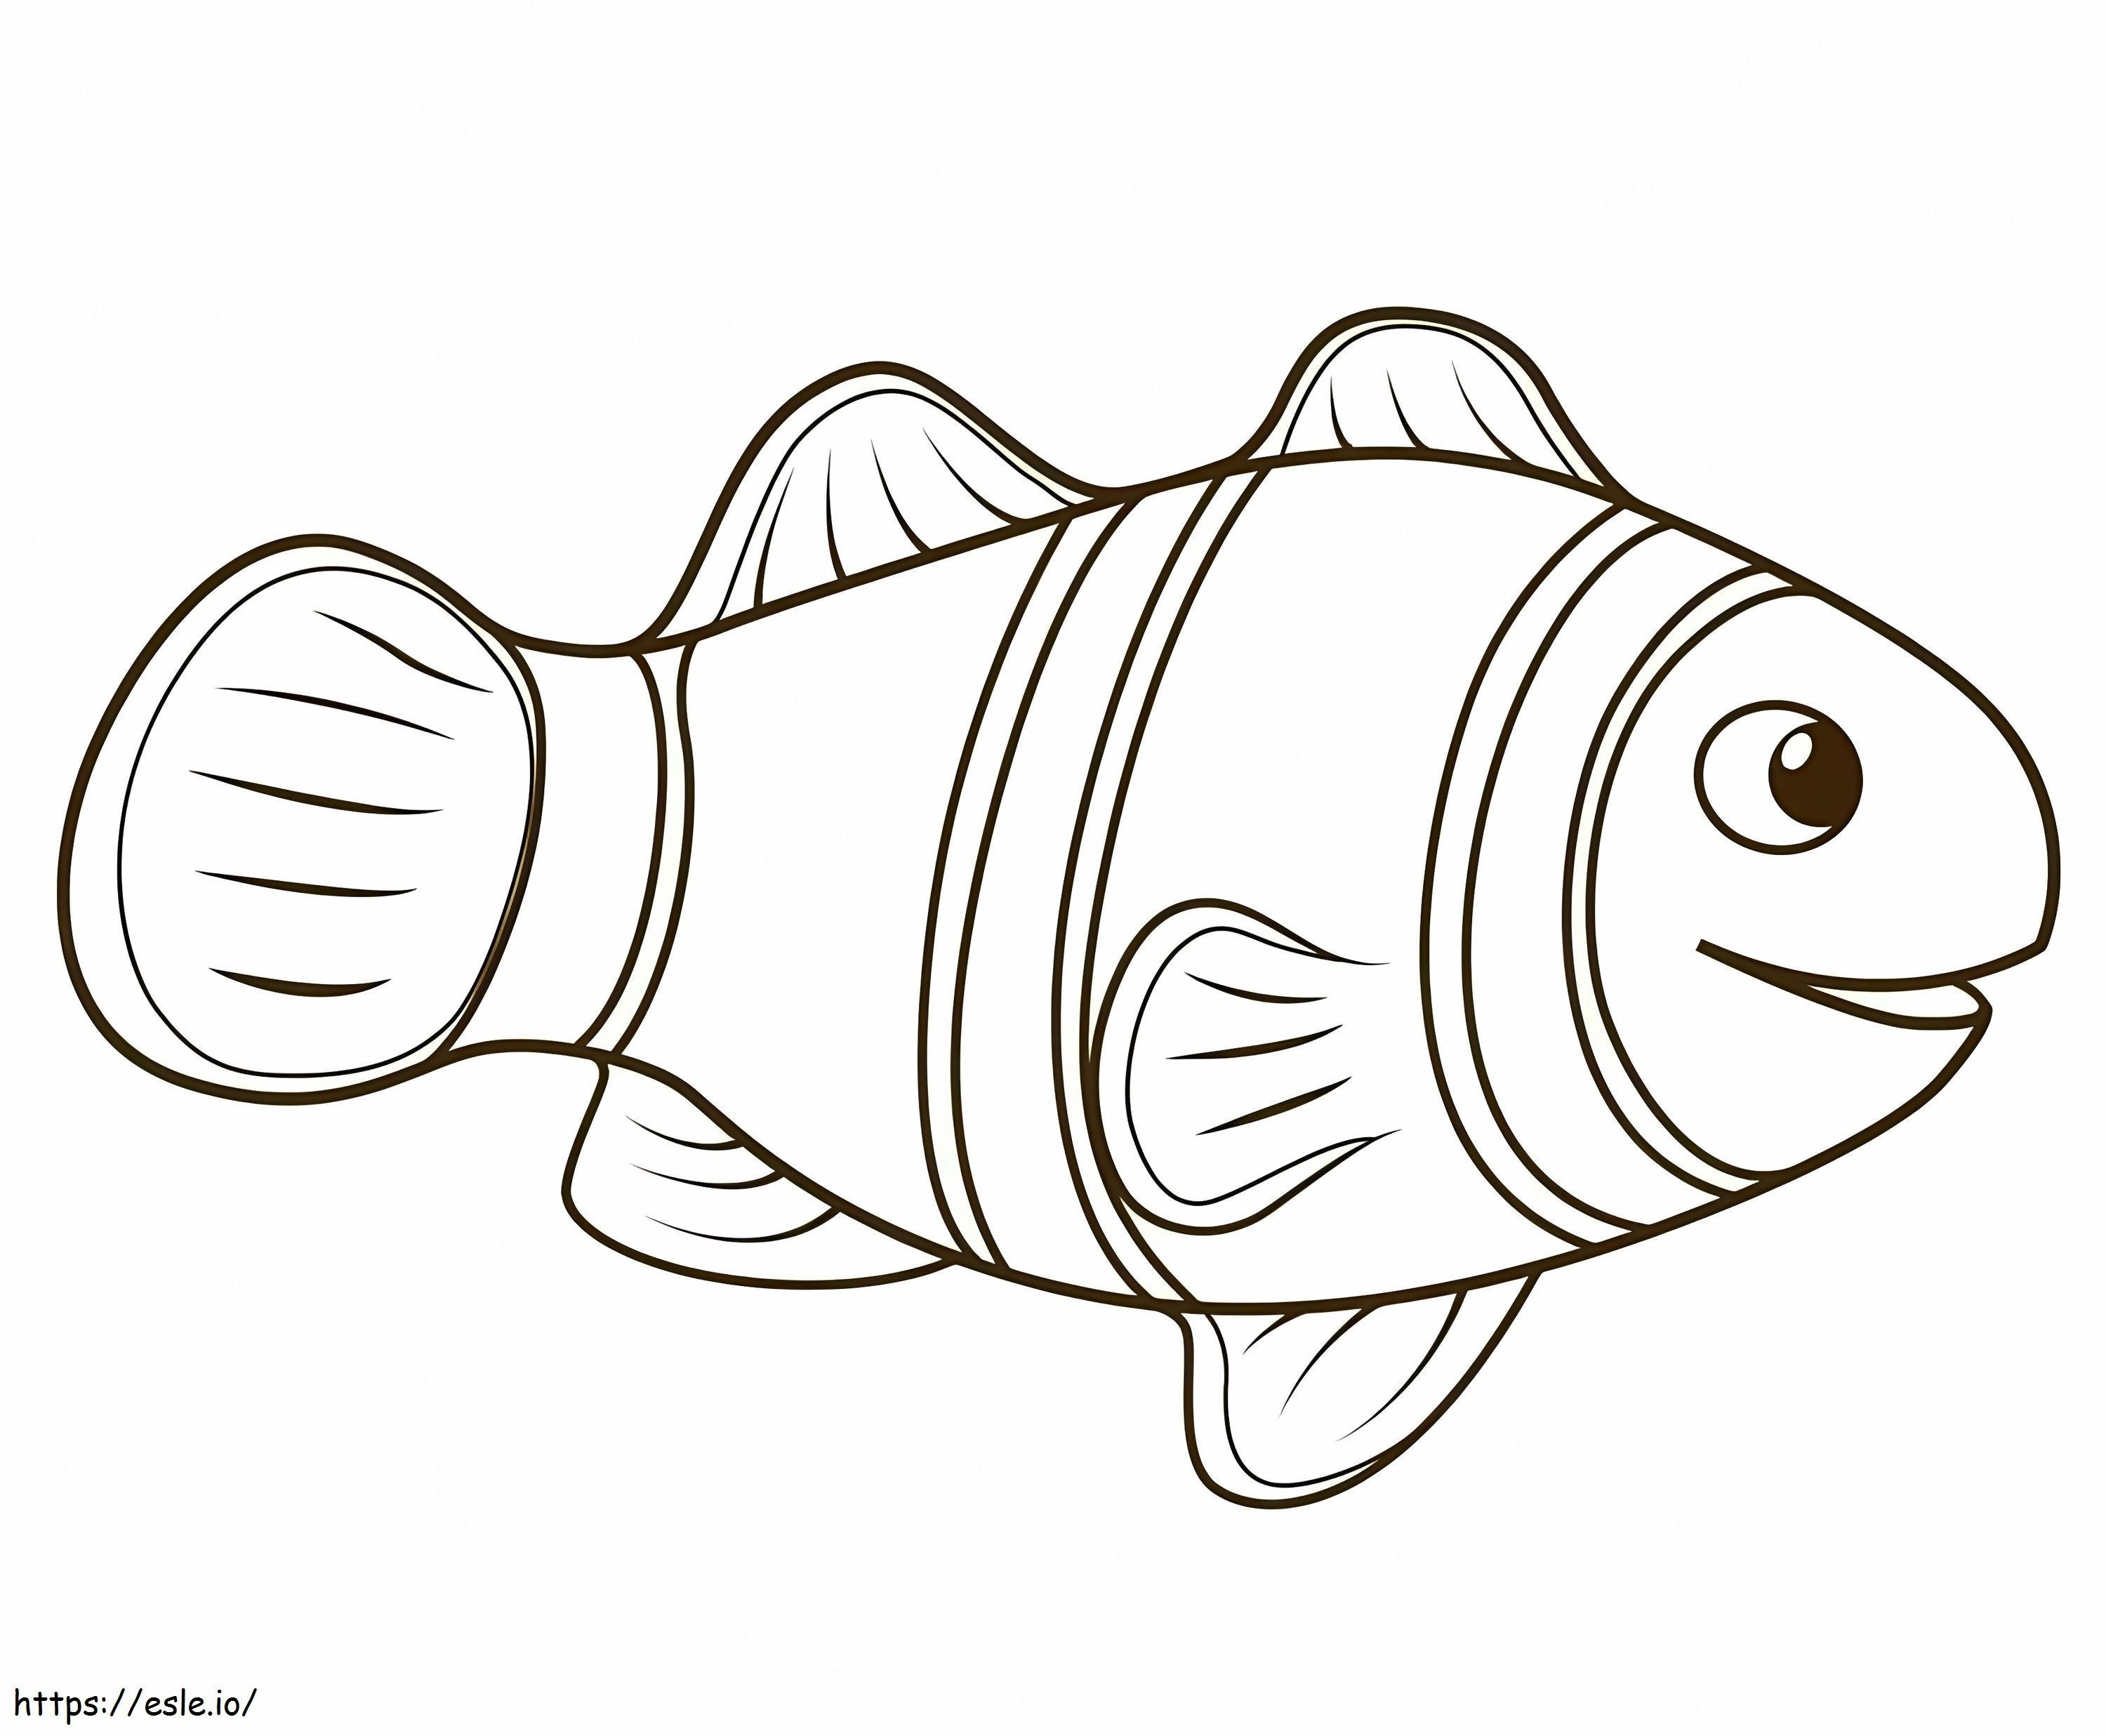 Poisson Clown 8 coloring page